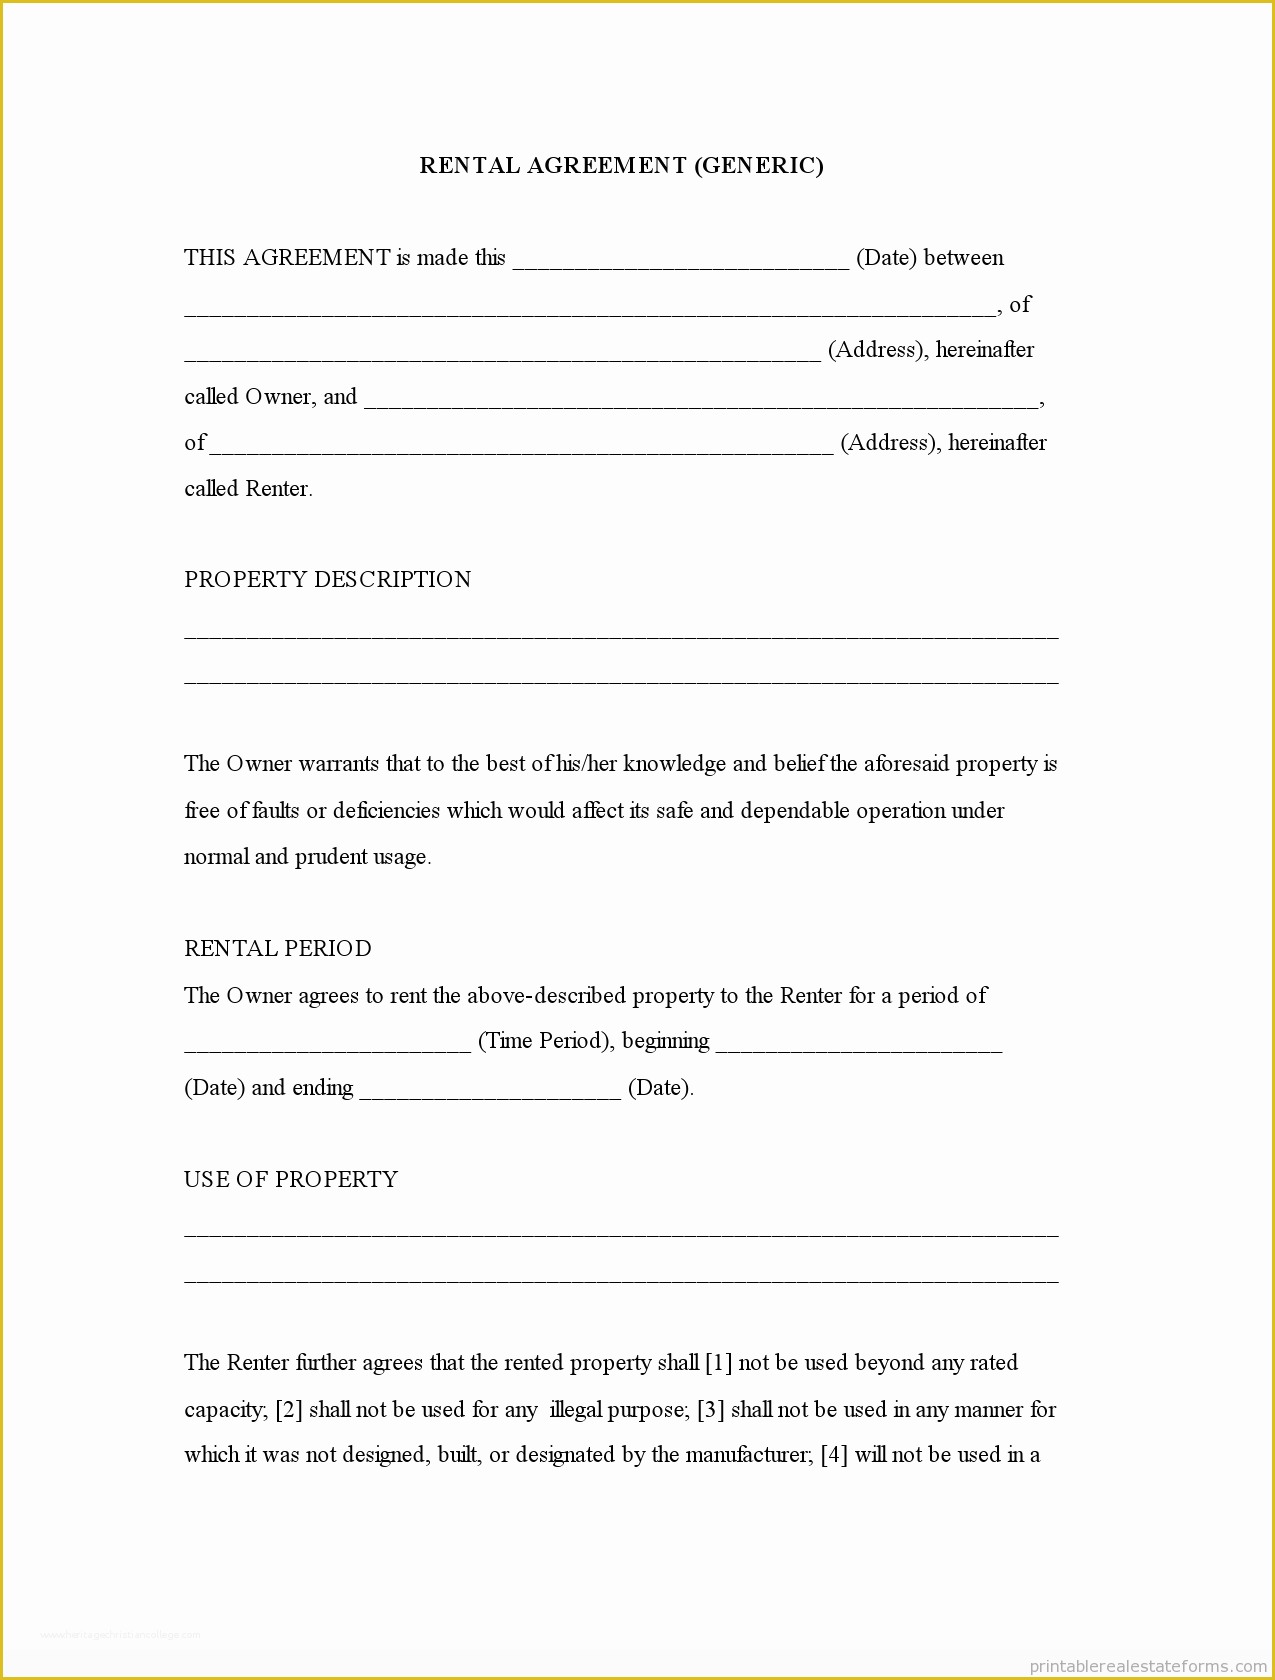 Rental Lease Agreement Template Free Of Generic Template Rental Agreement forms Free Printable